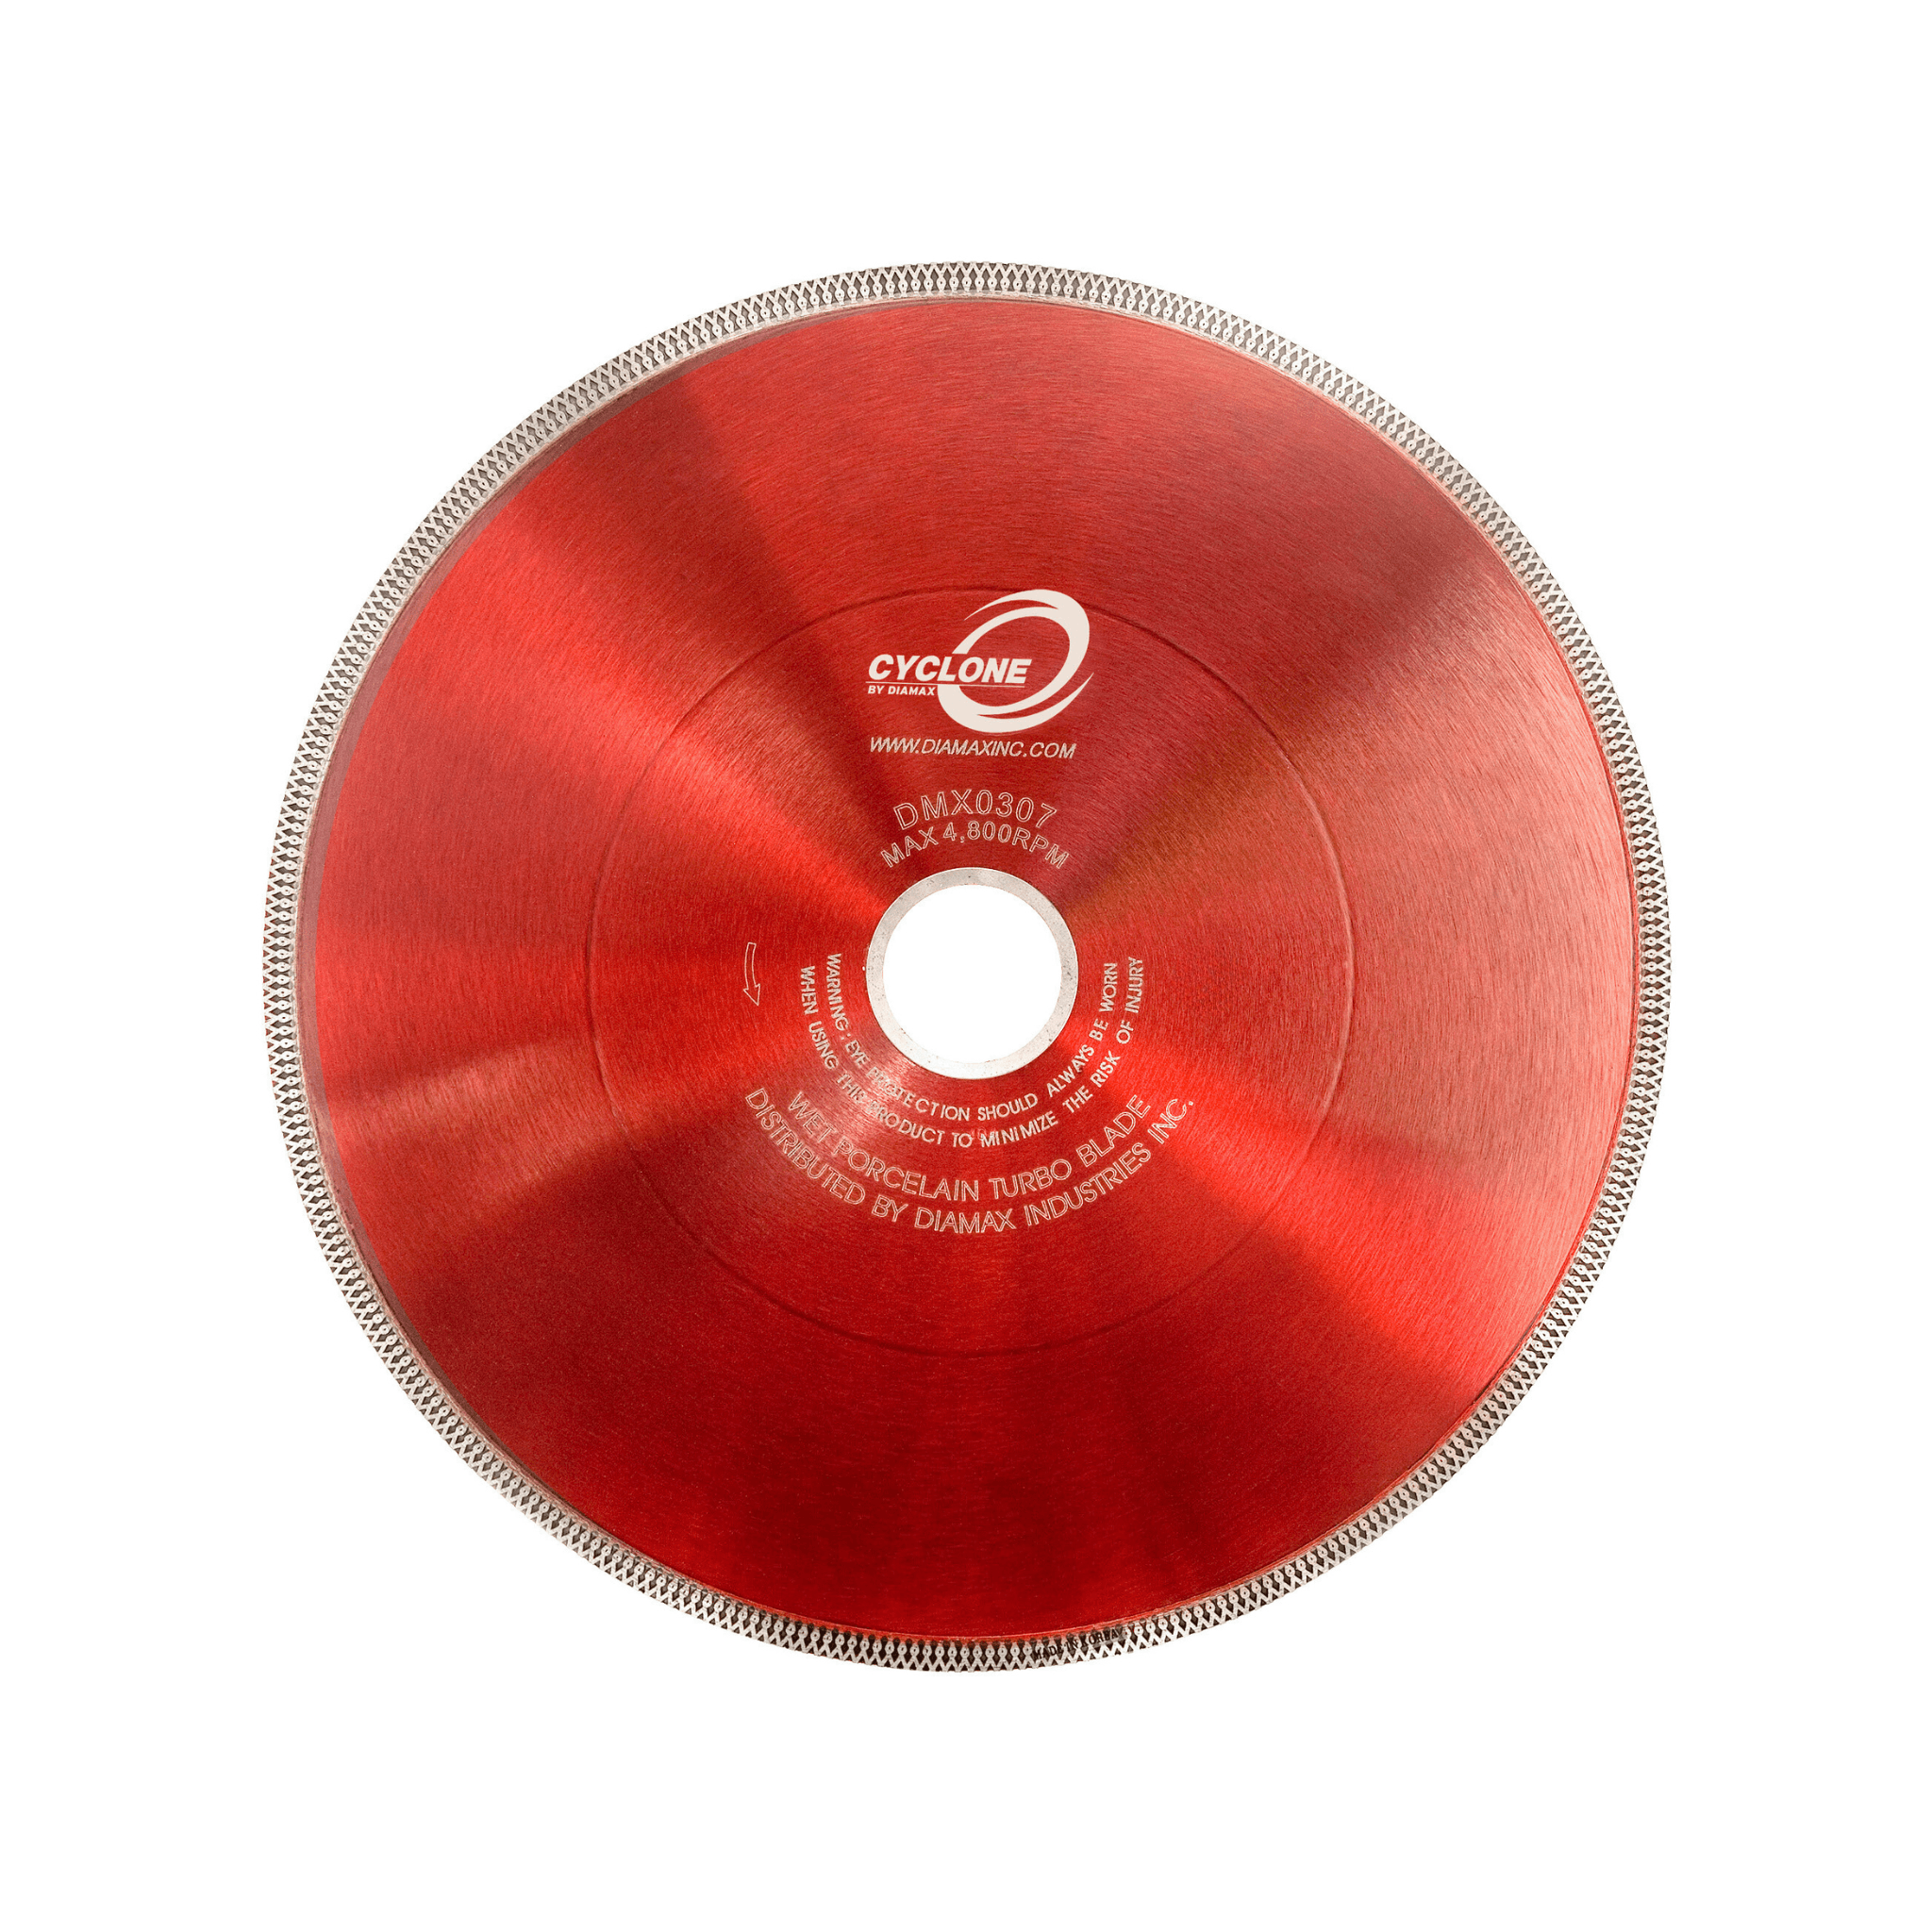 Cyclone Porcelain Turbo Blade 14" - Direct Stone Tool Supply, Inc